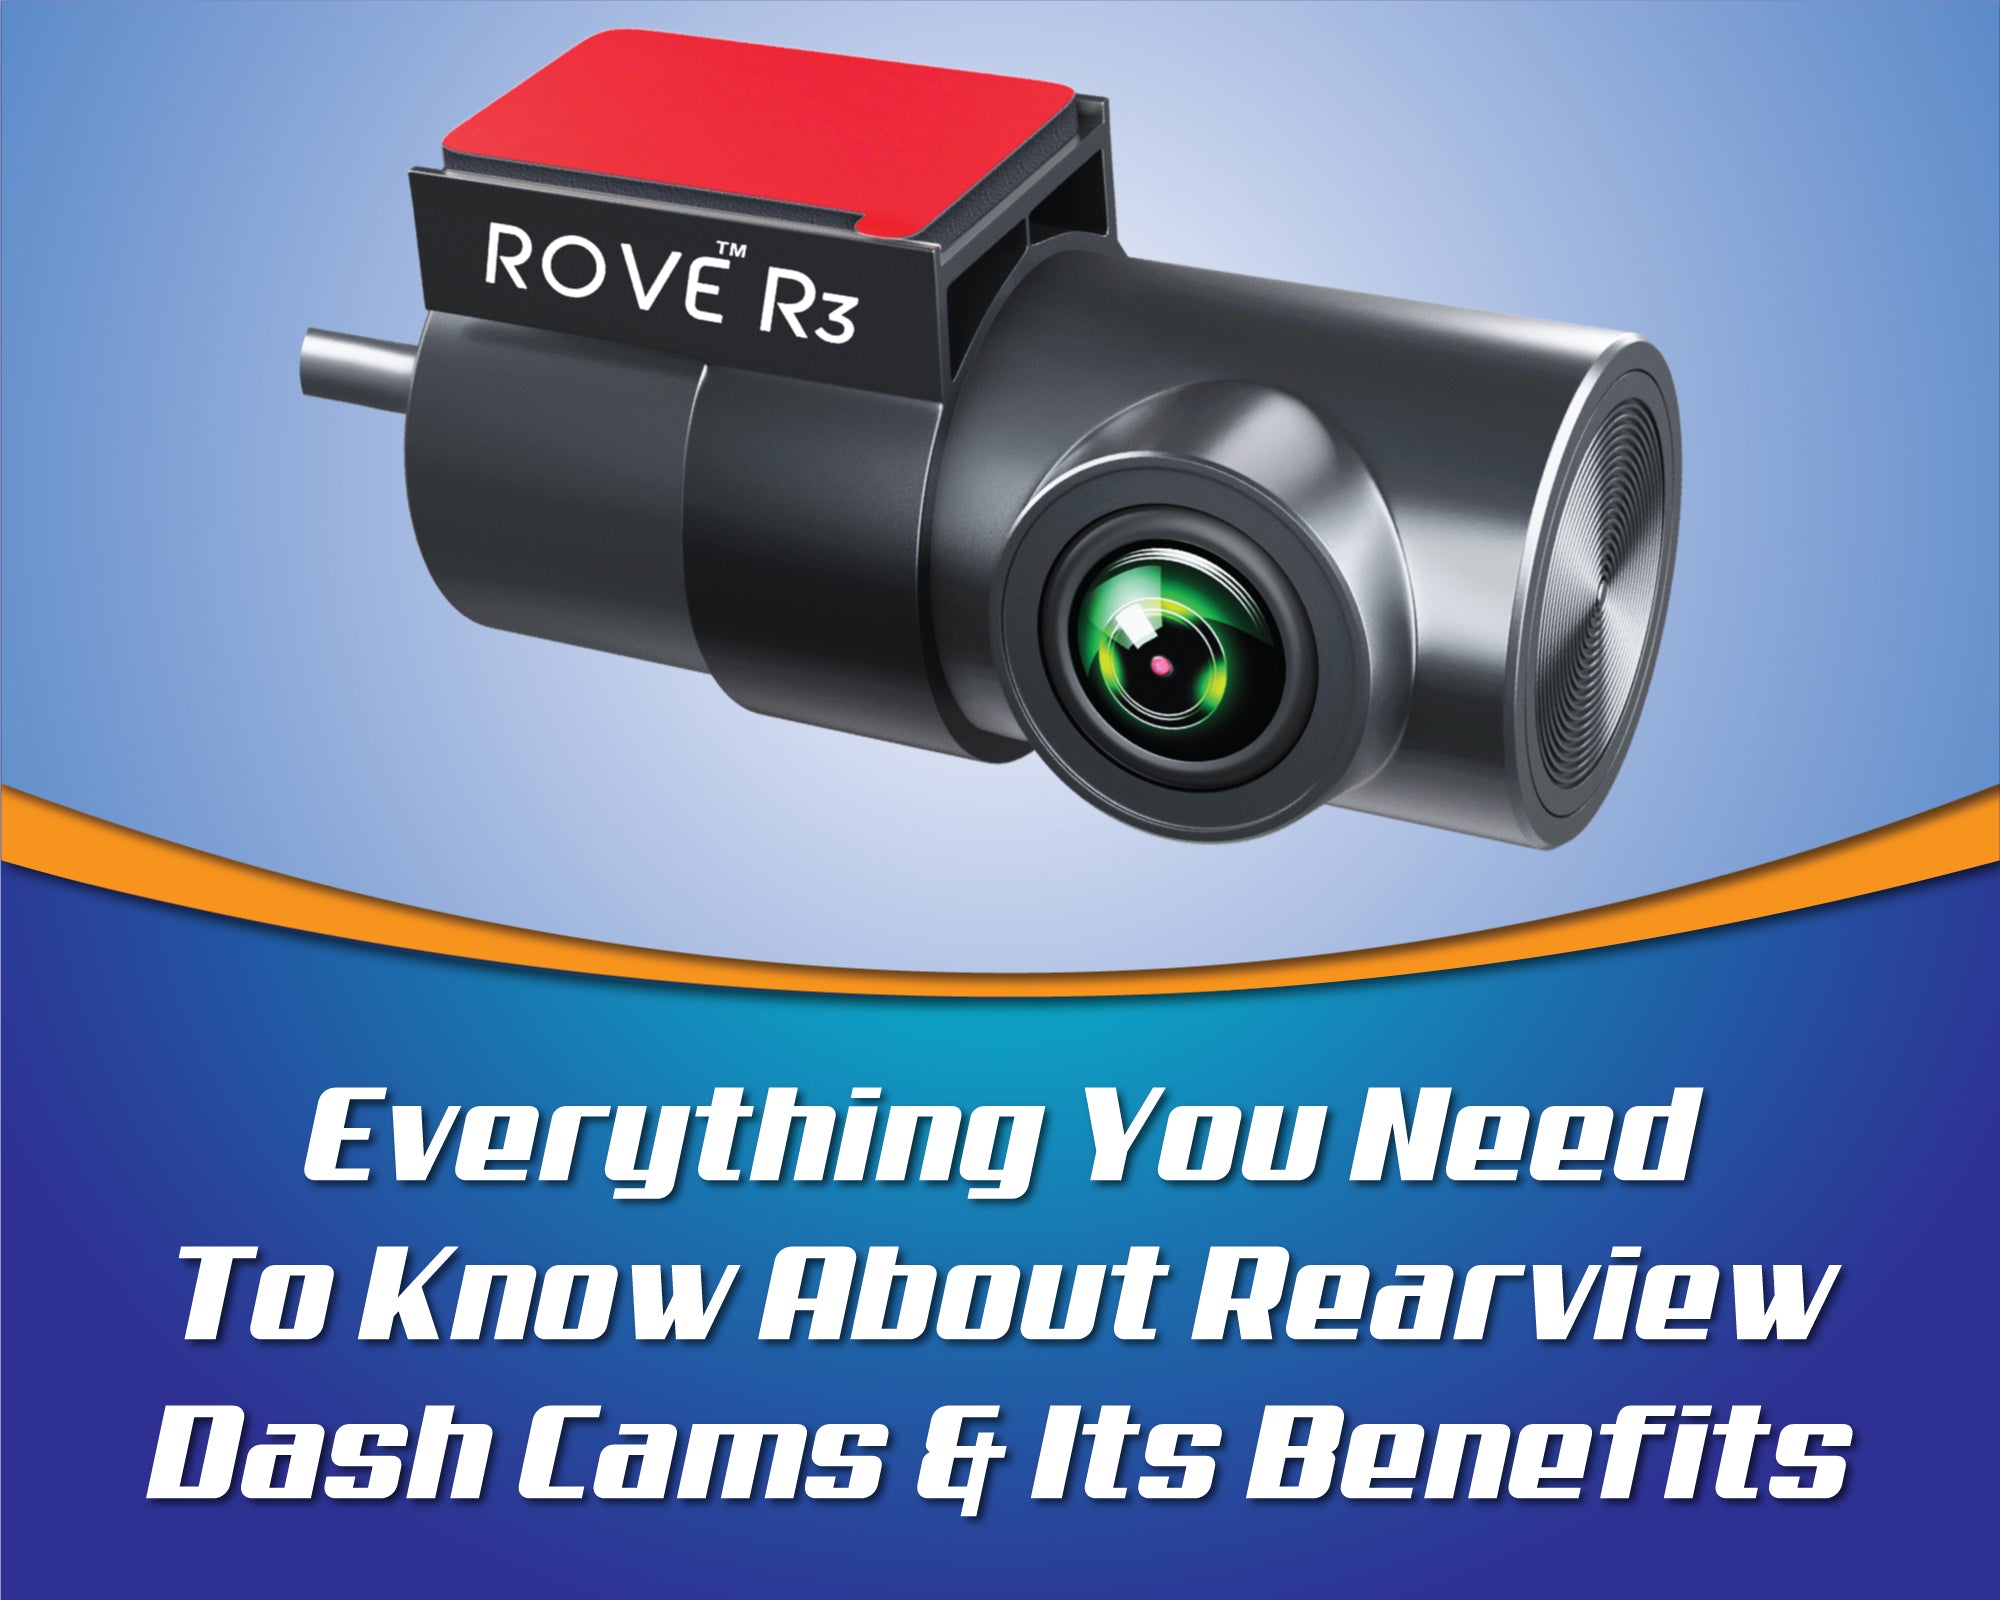 Everything You Need To Know About Rearview Dash Cams and Its Benefits